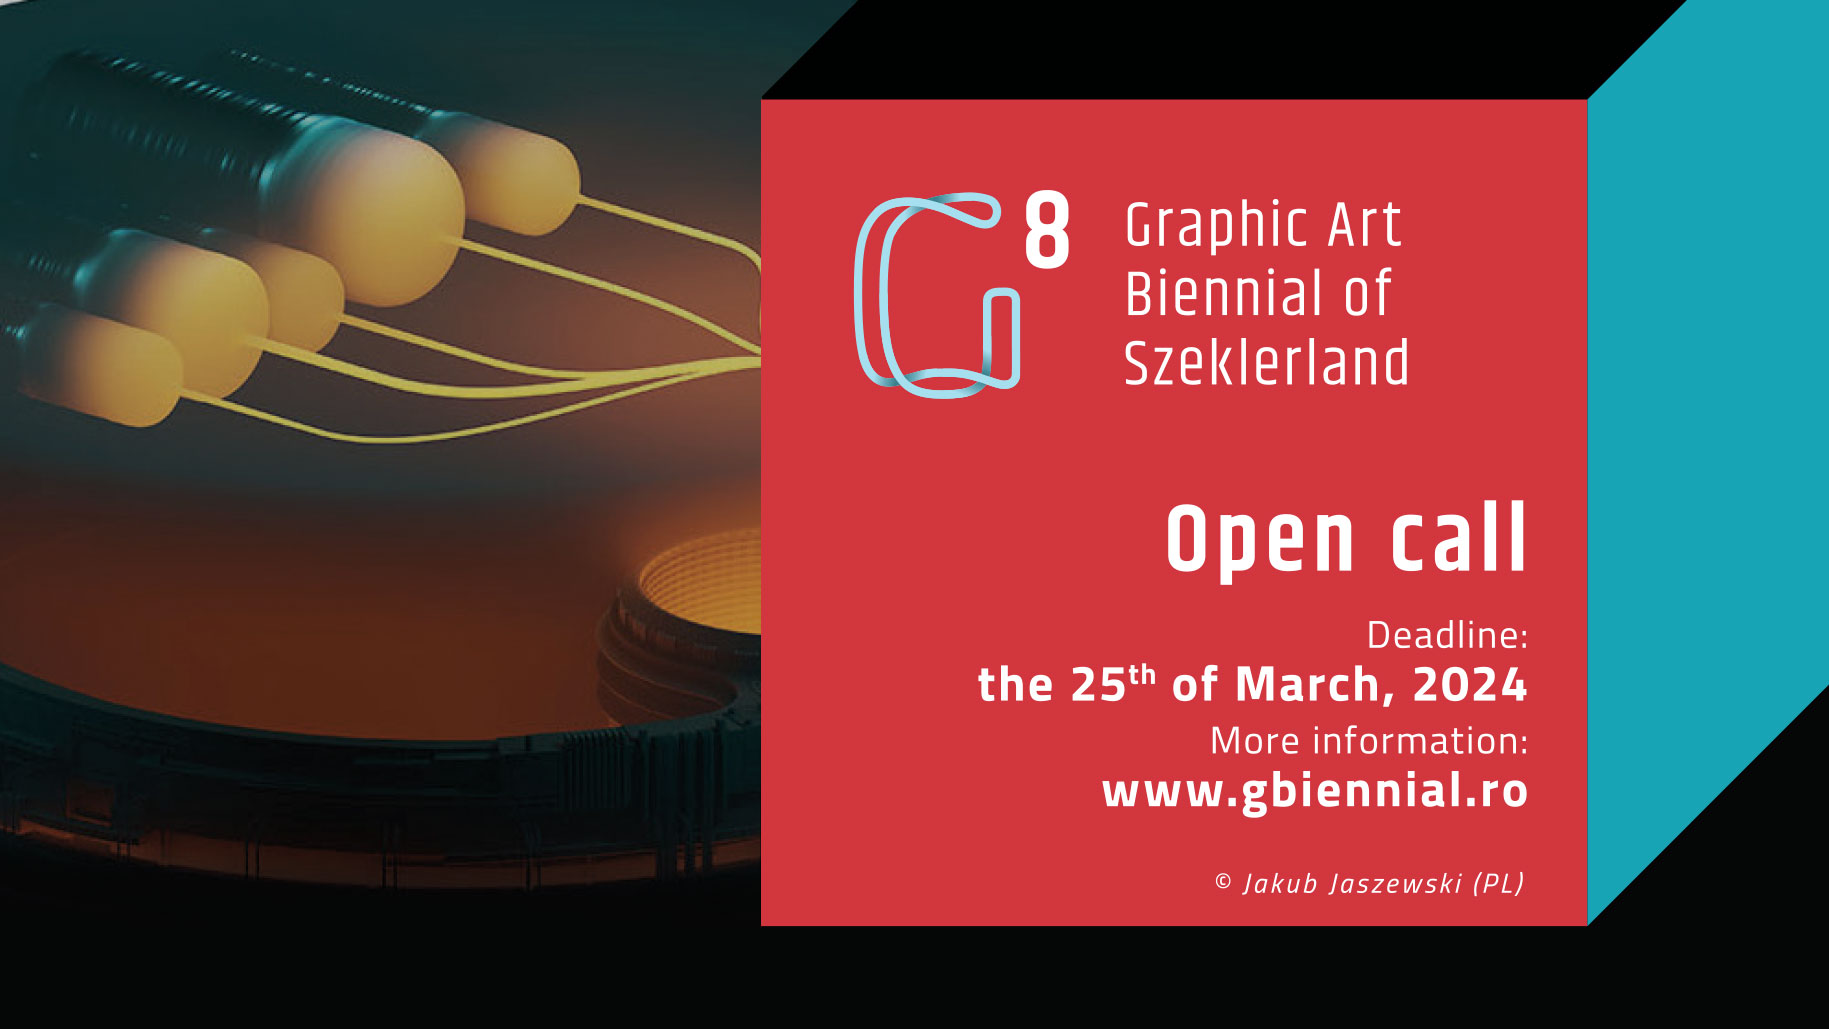 Public Call for Submissions for the 8th Graphic Art Biennial of Szeklerland Now Open